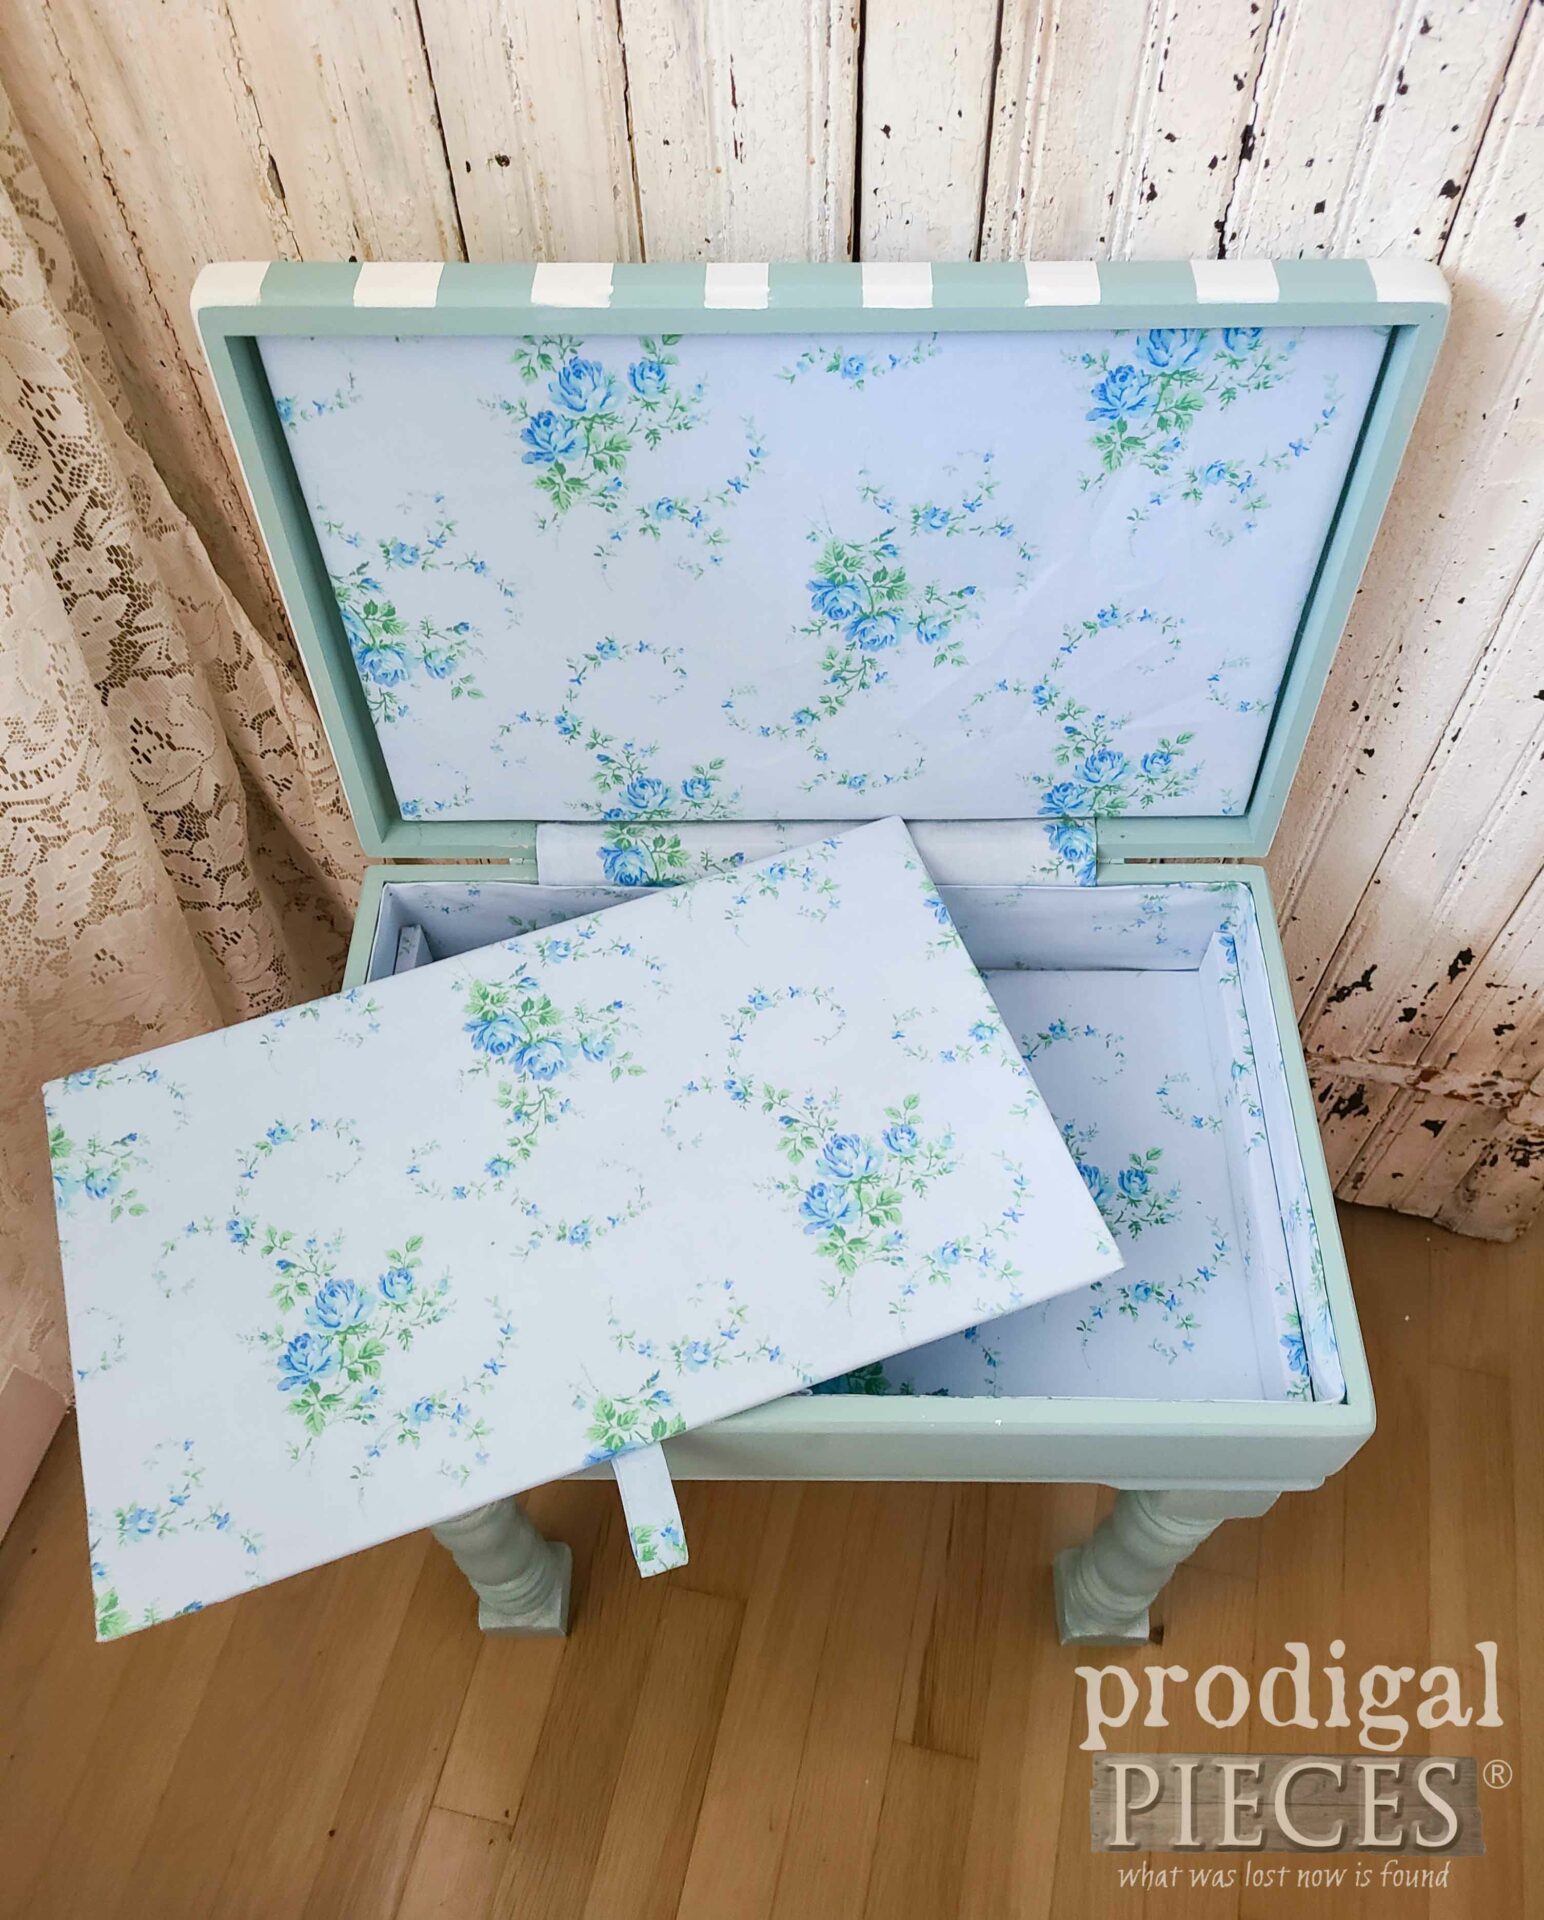 Blue Rose Floral Lined Storage Side Table | prodigalpieces.com #prodigalpieces #roses #shabbychic #french